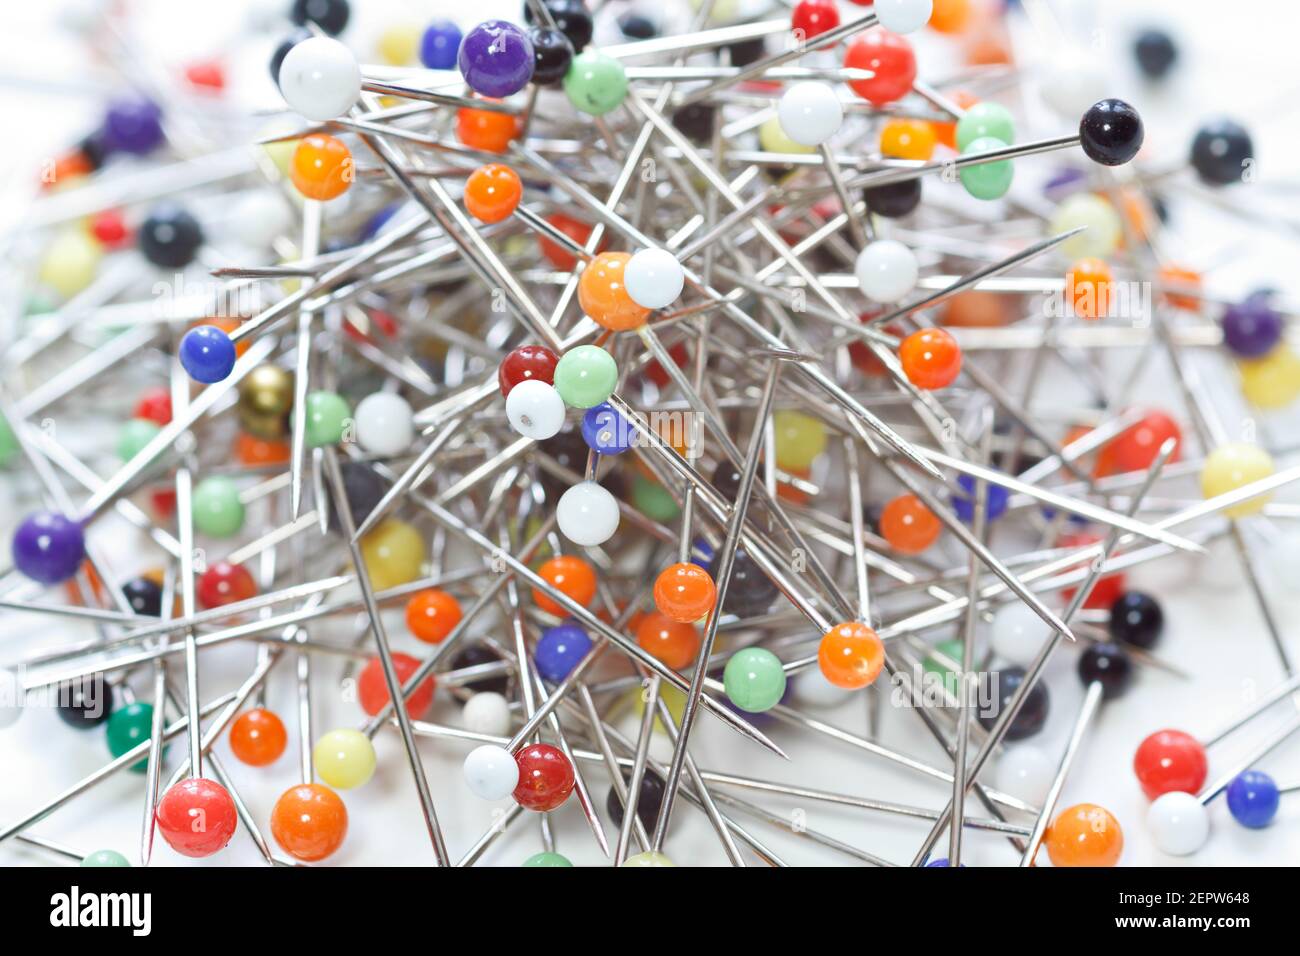 Heap of multi-coloured sewing pins on a white background, Stock image